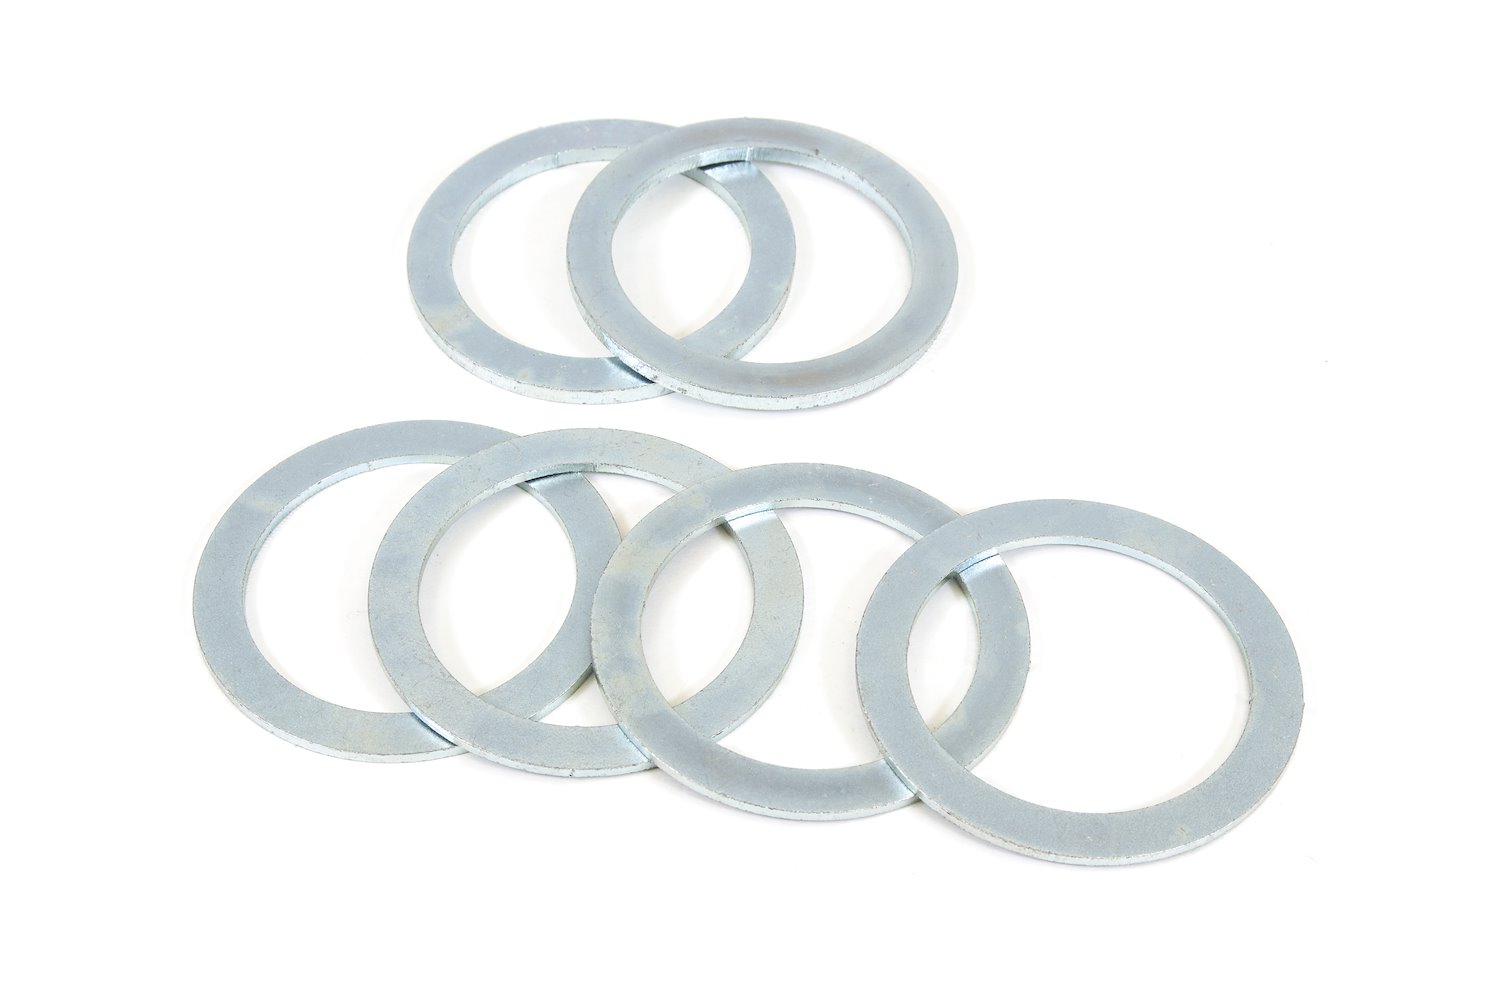 COIL SPRING SPACERS